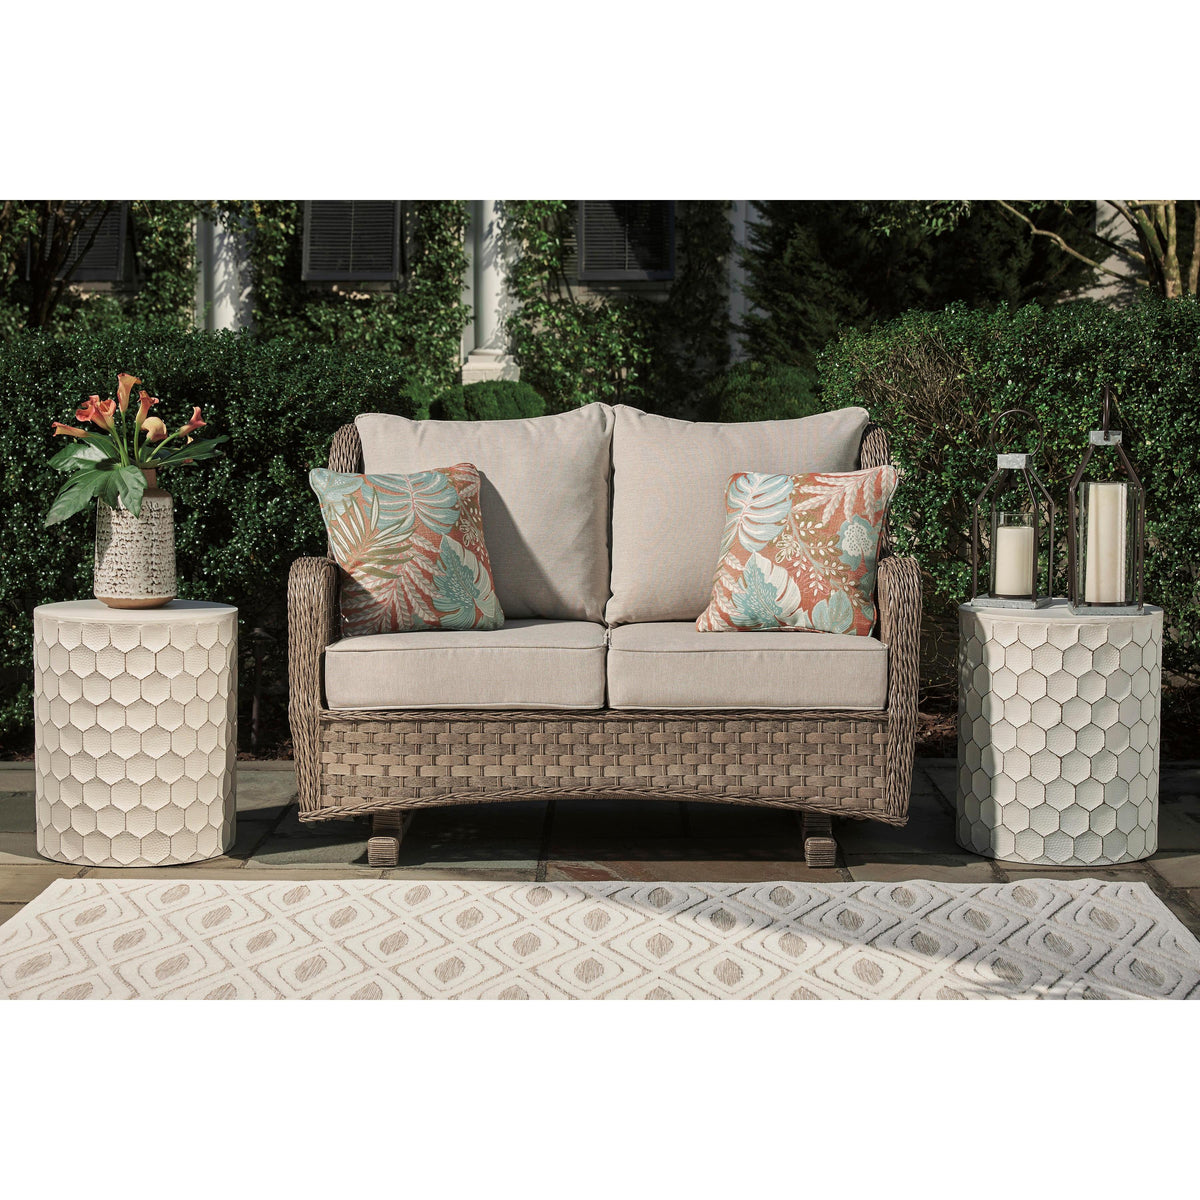 Signature Design by Ashley Clear Ridge P361 4 pc Outdoor Seating Set